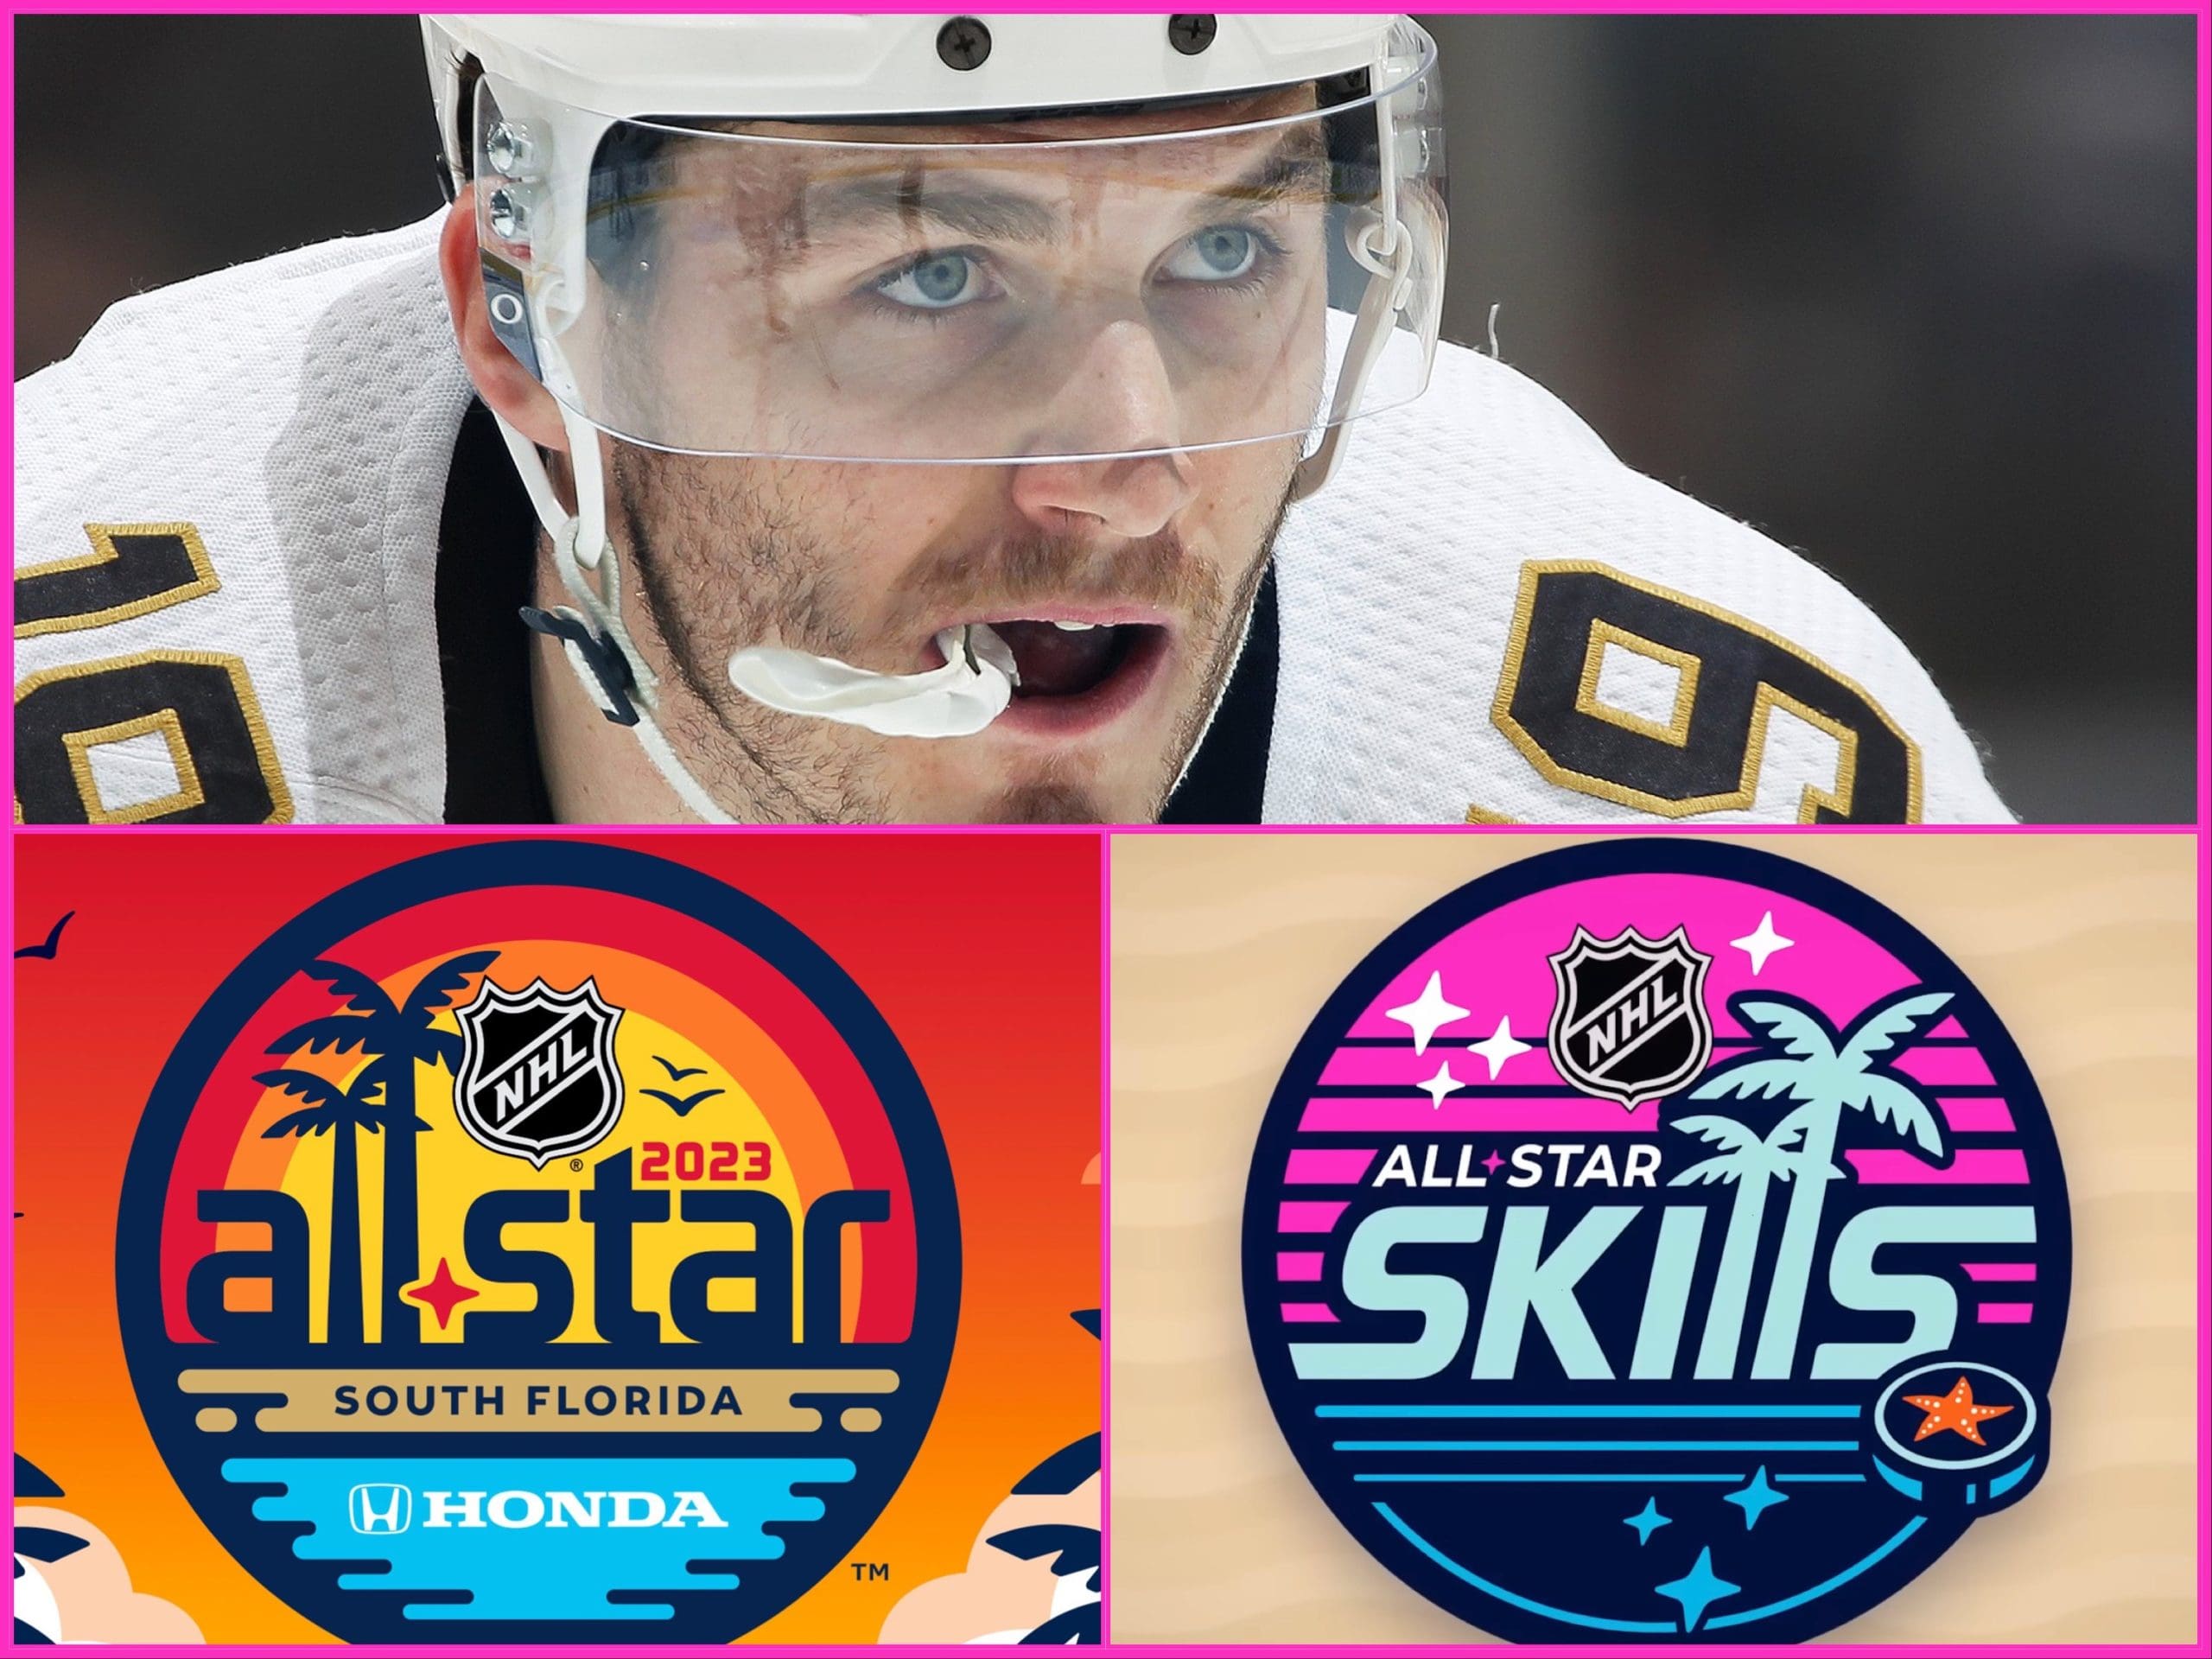 Nhl all-star panthers